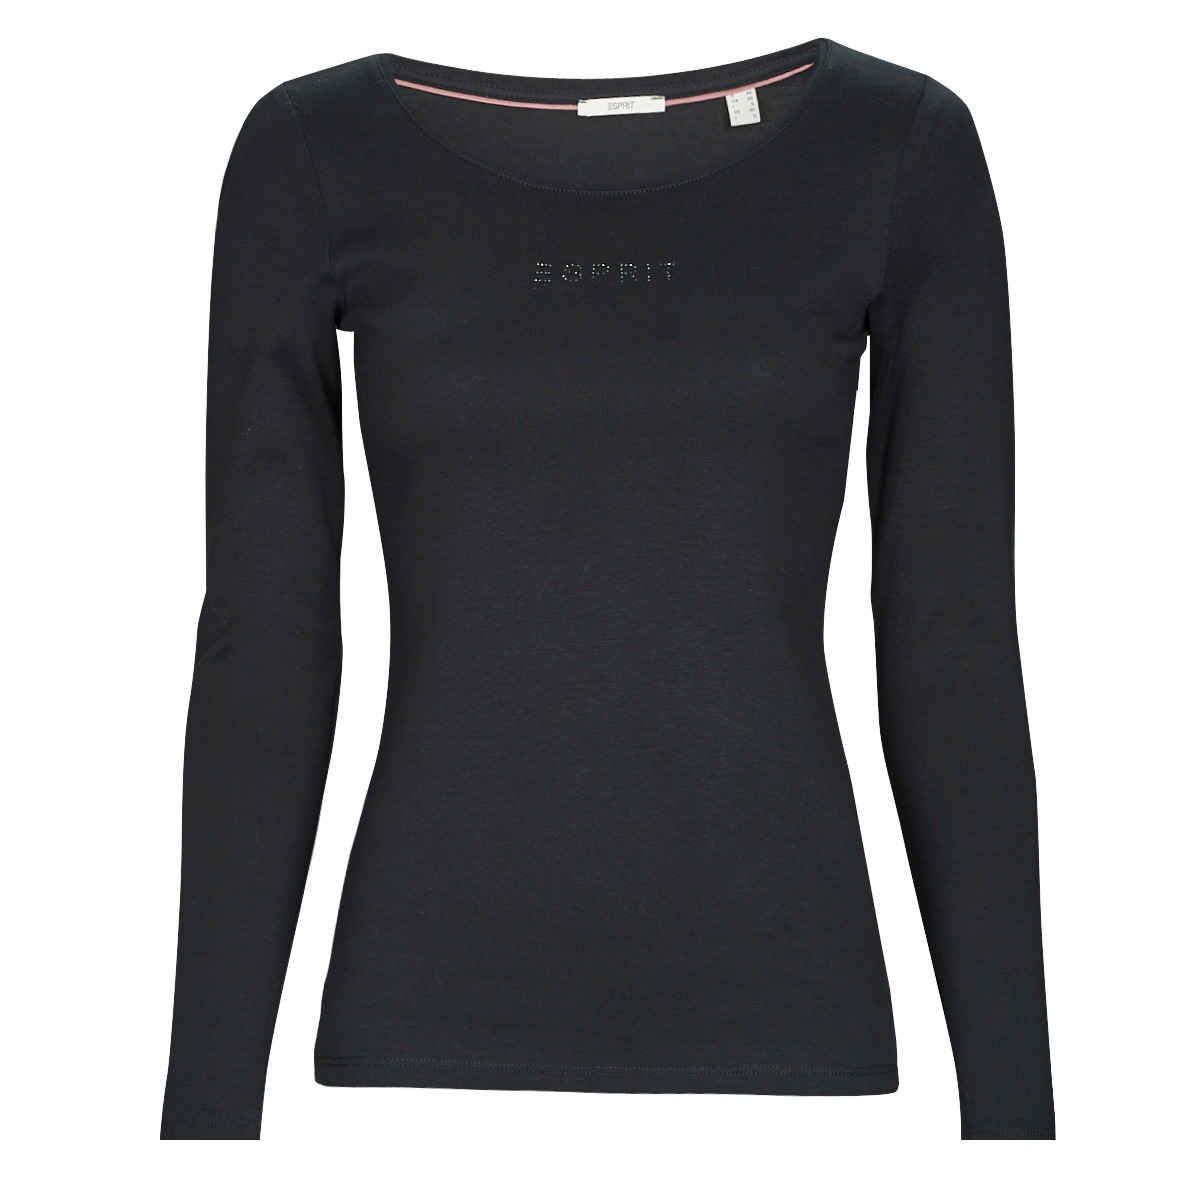 Esprit SUS lslv Long Clothing Free sleeved shirts delivery - Spartoo | - NET Black ! Women sl